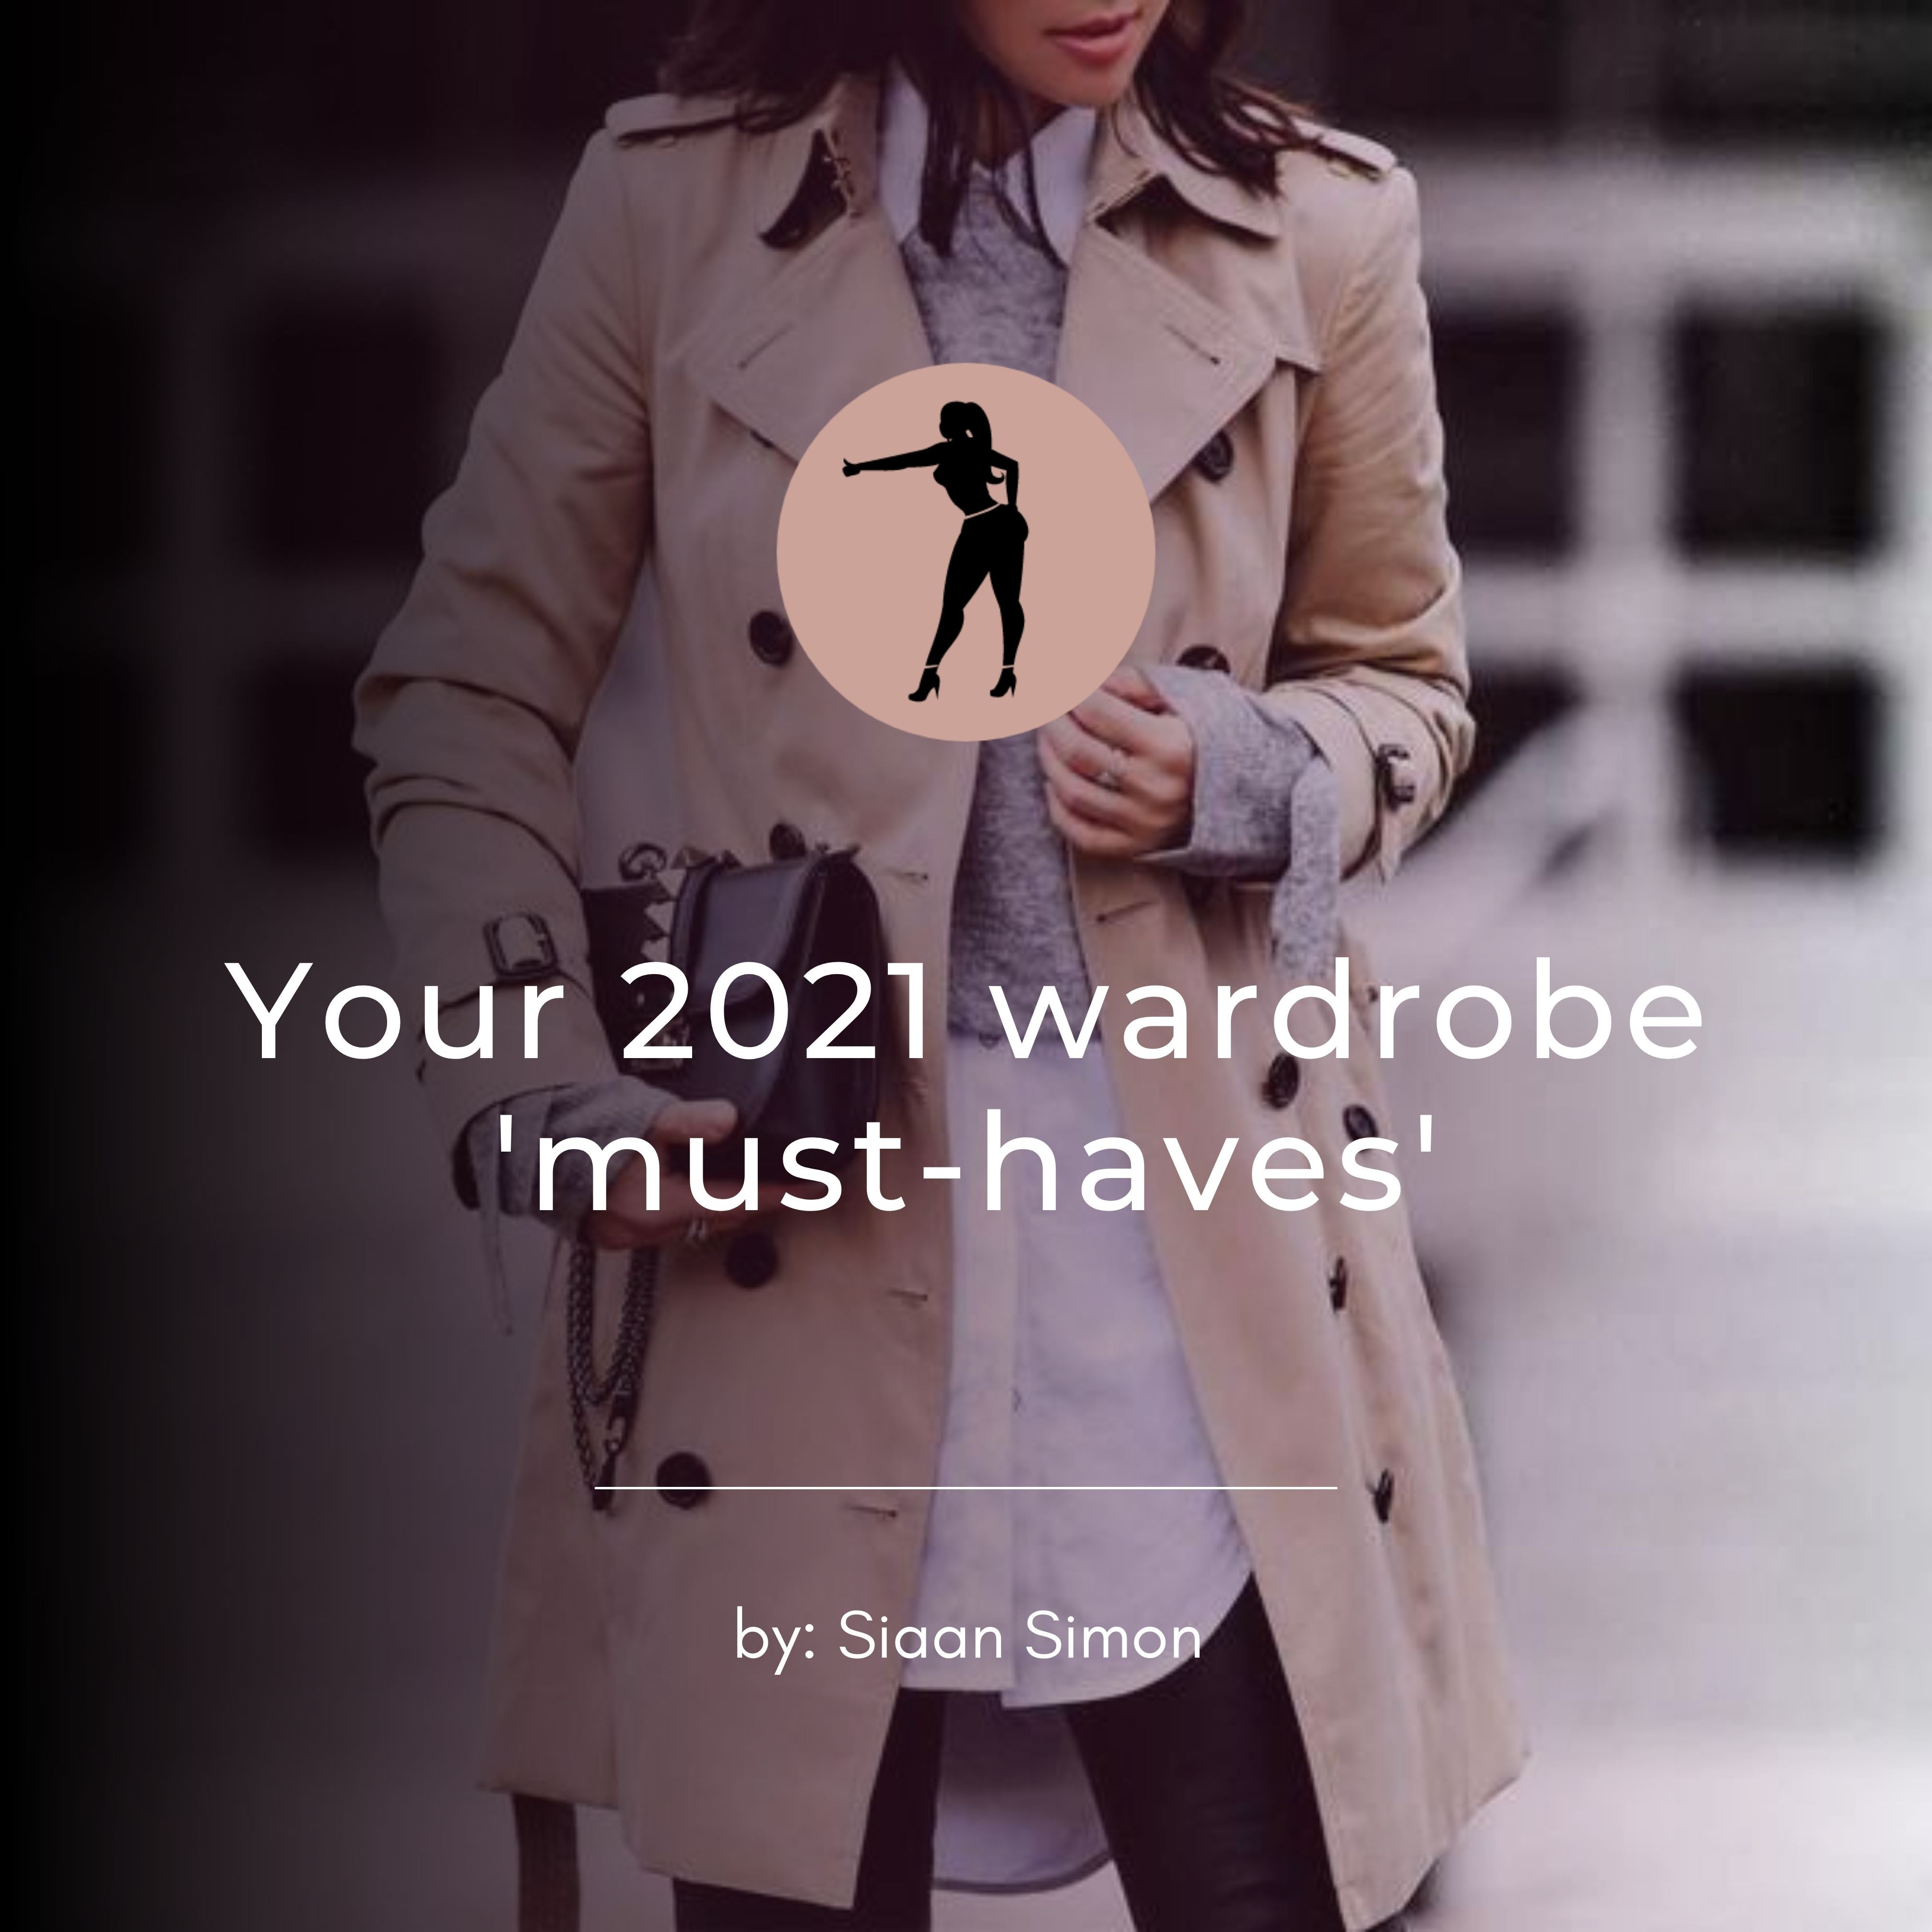 Your 2021 wardrobe 'must-haves'